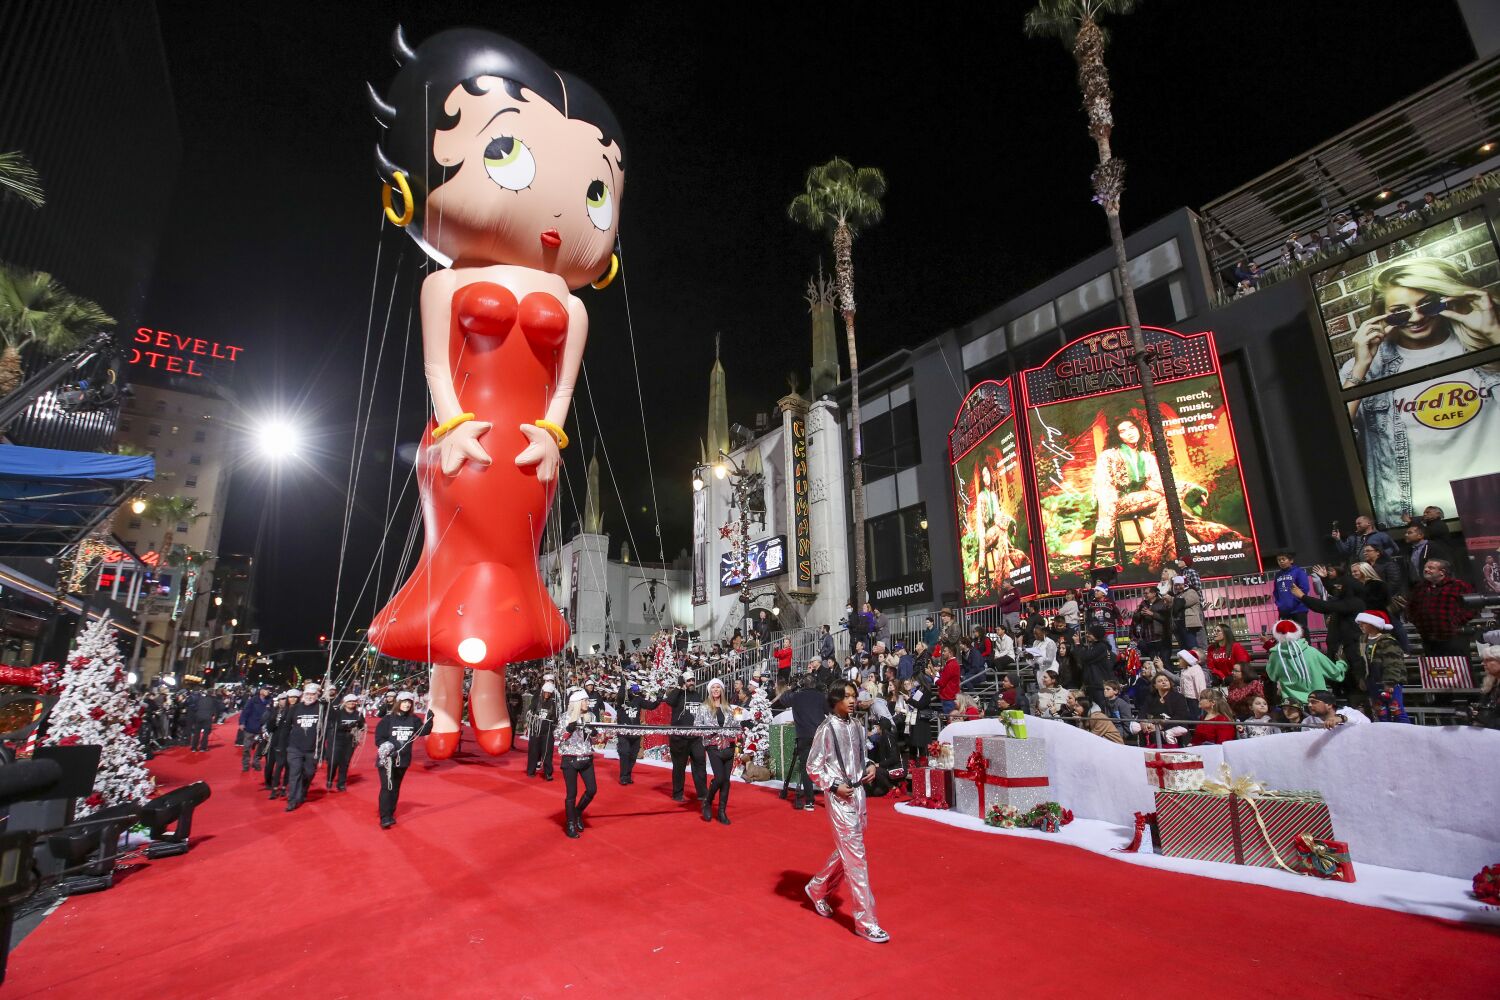 Photos: Rolling out the red carpet for 90th anniversary of Hollywood Christmas Parade